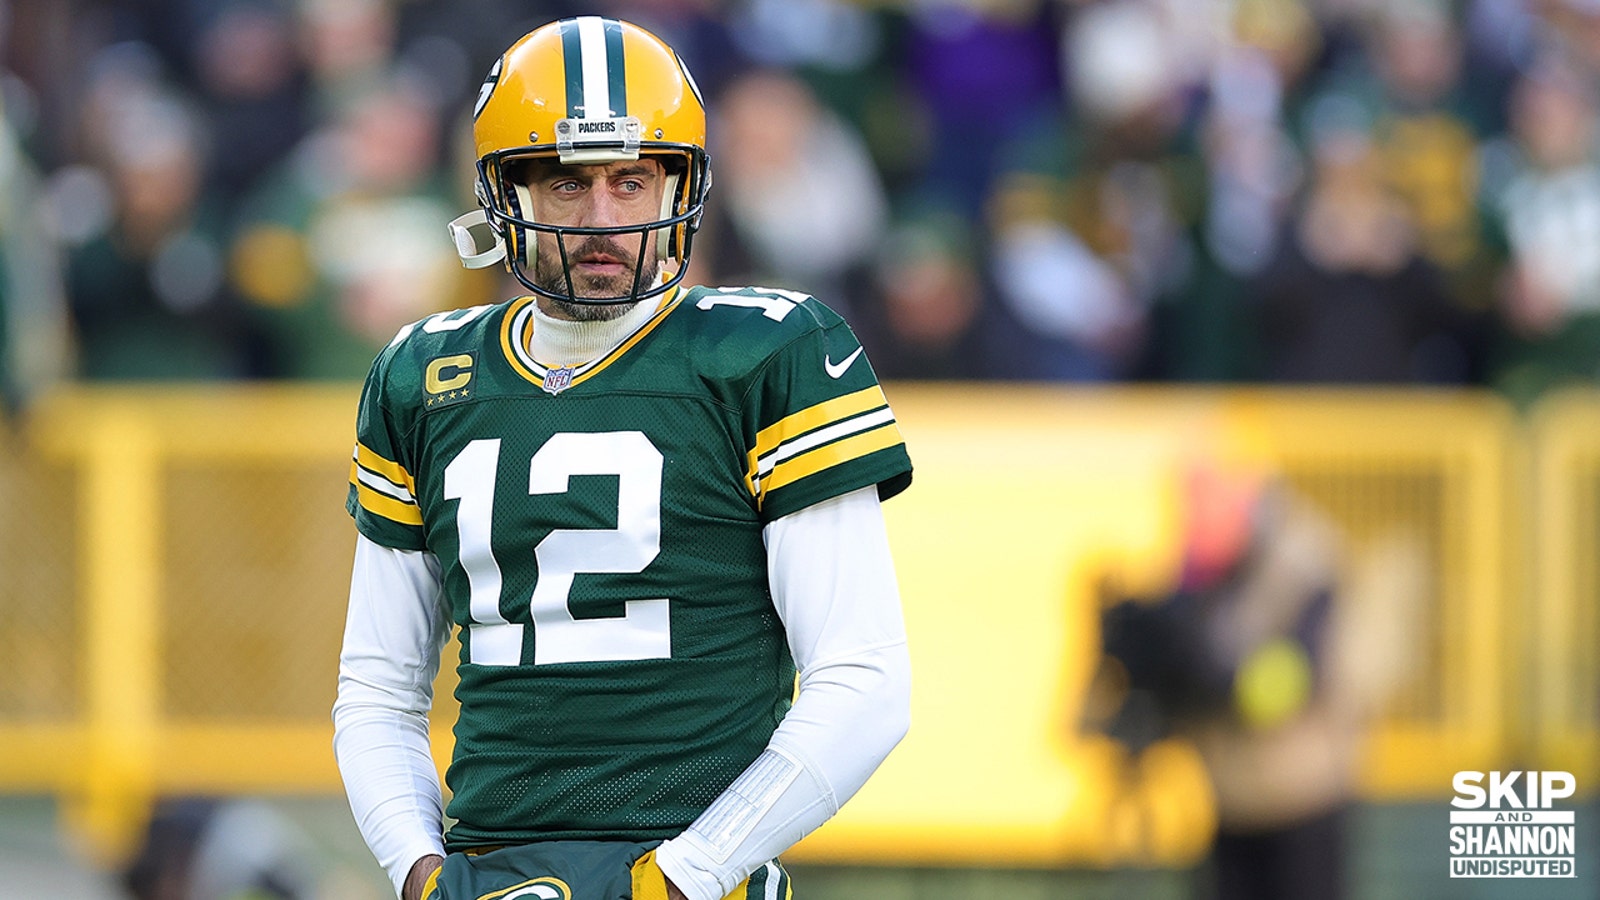 Aaron Rodgers is not committed to returning to the Packers